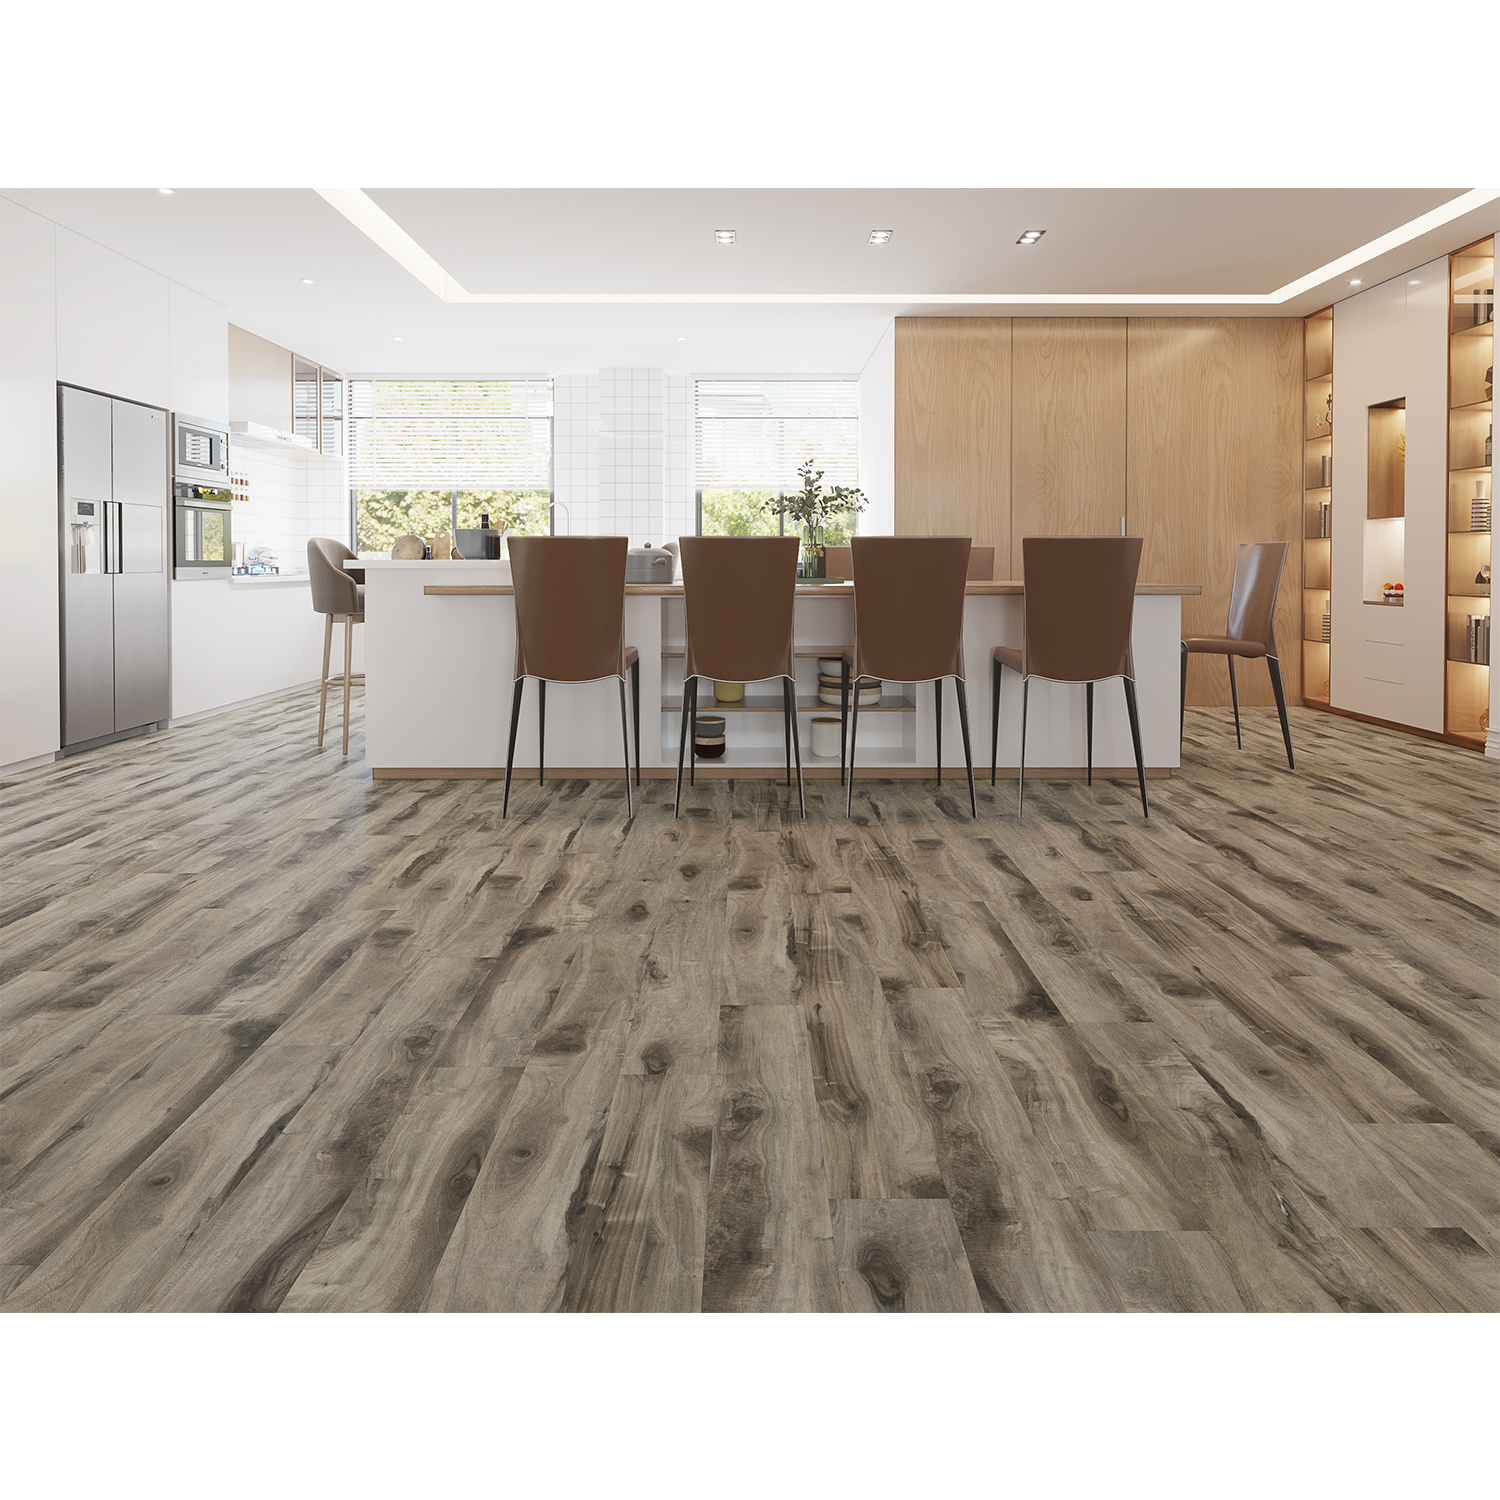 Floorest - 12mm Laminate AC4 - 7 1/2 Embossed Finish - E705 - Cloudy Sky - 20.56 SF / Box